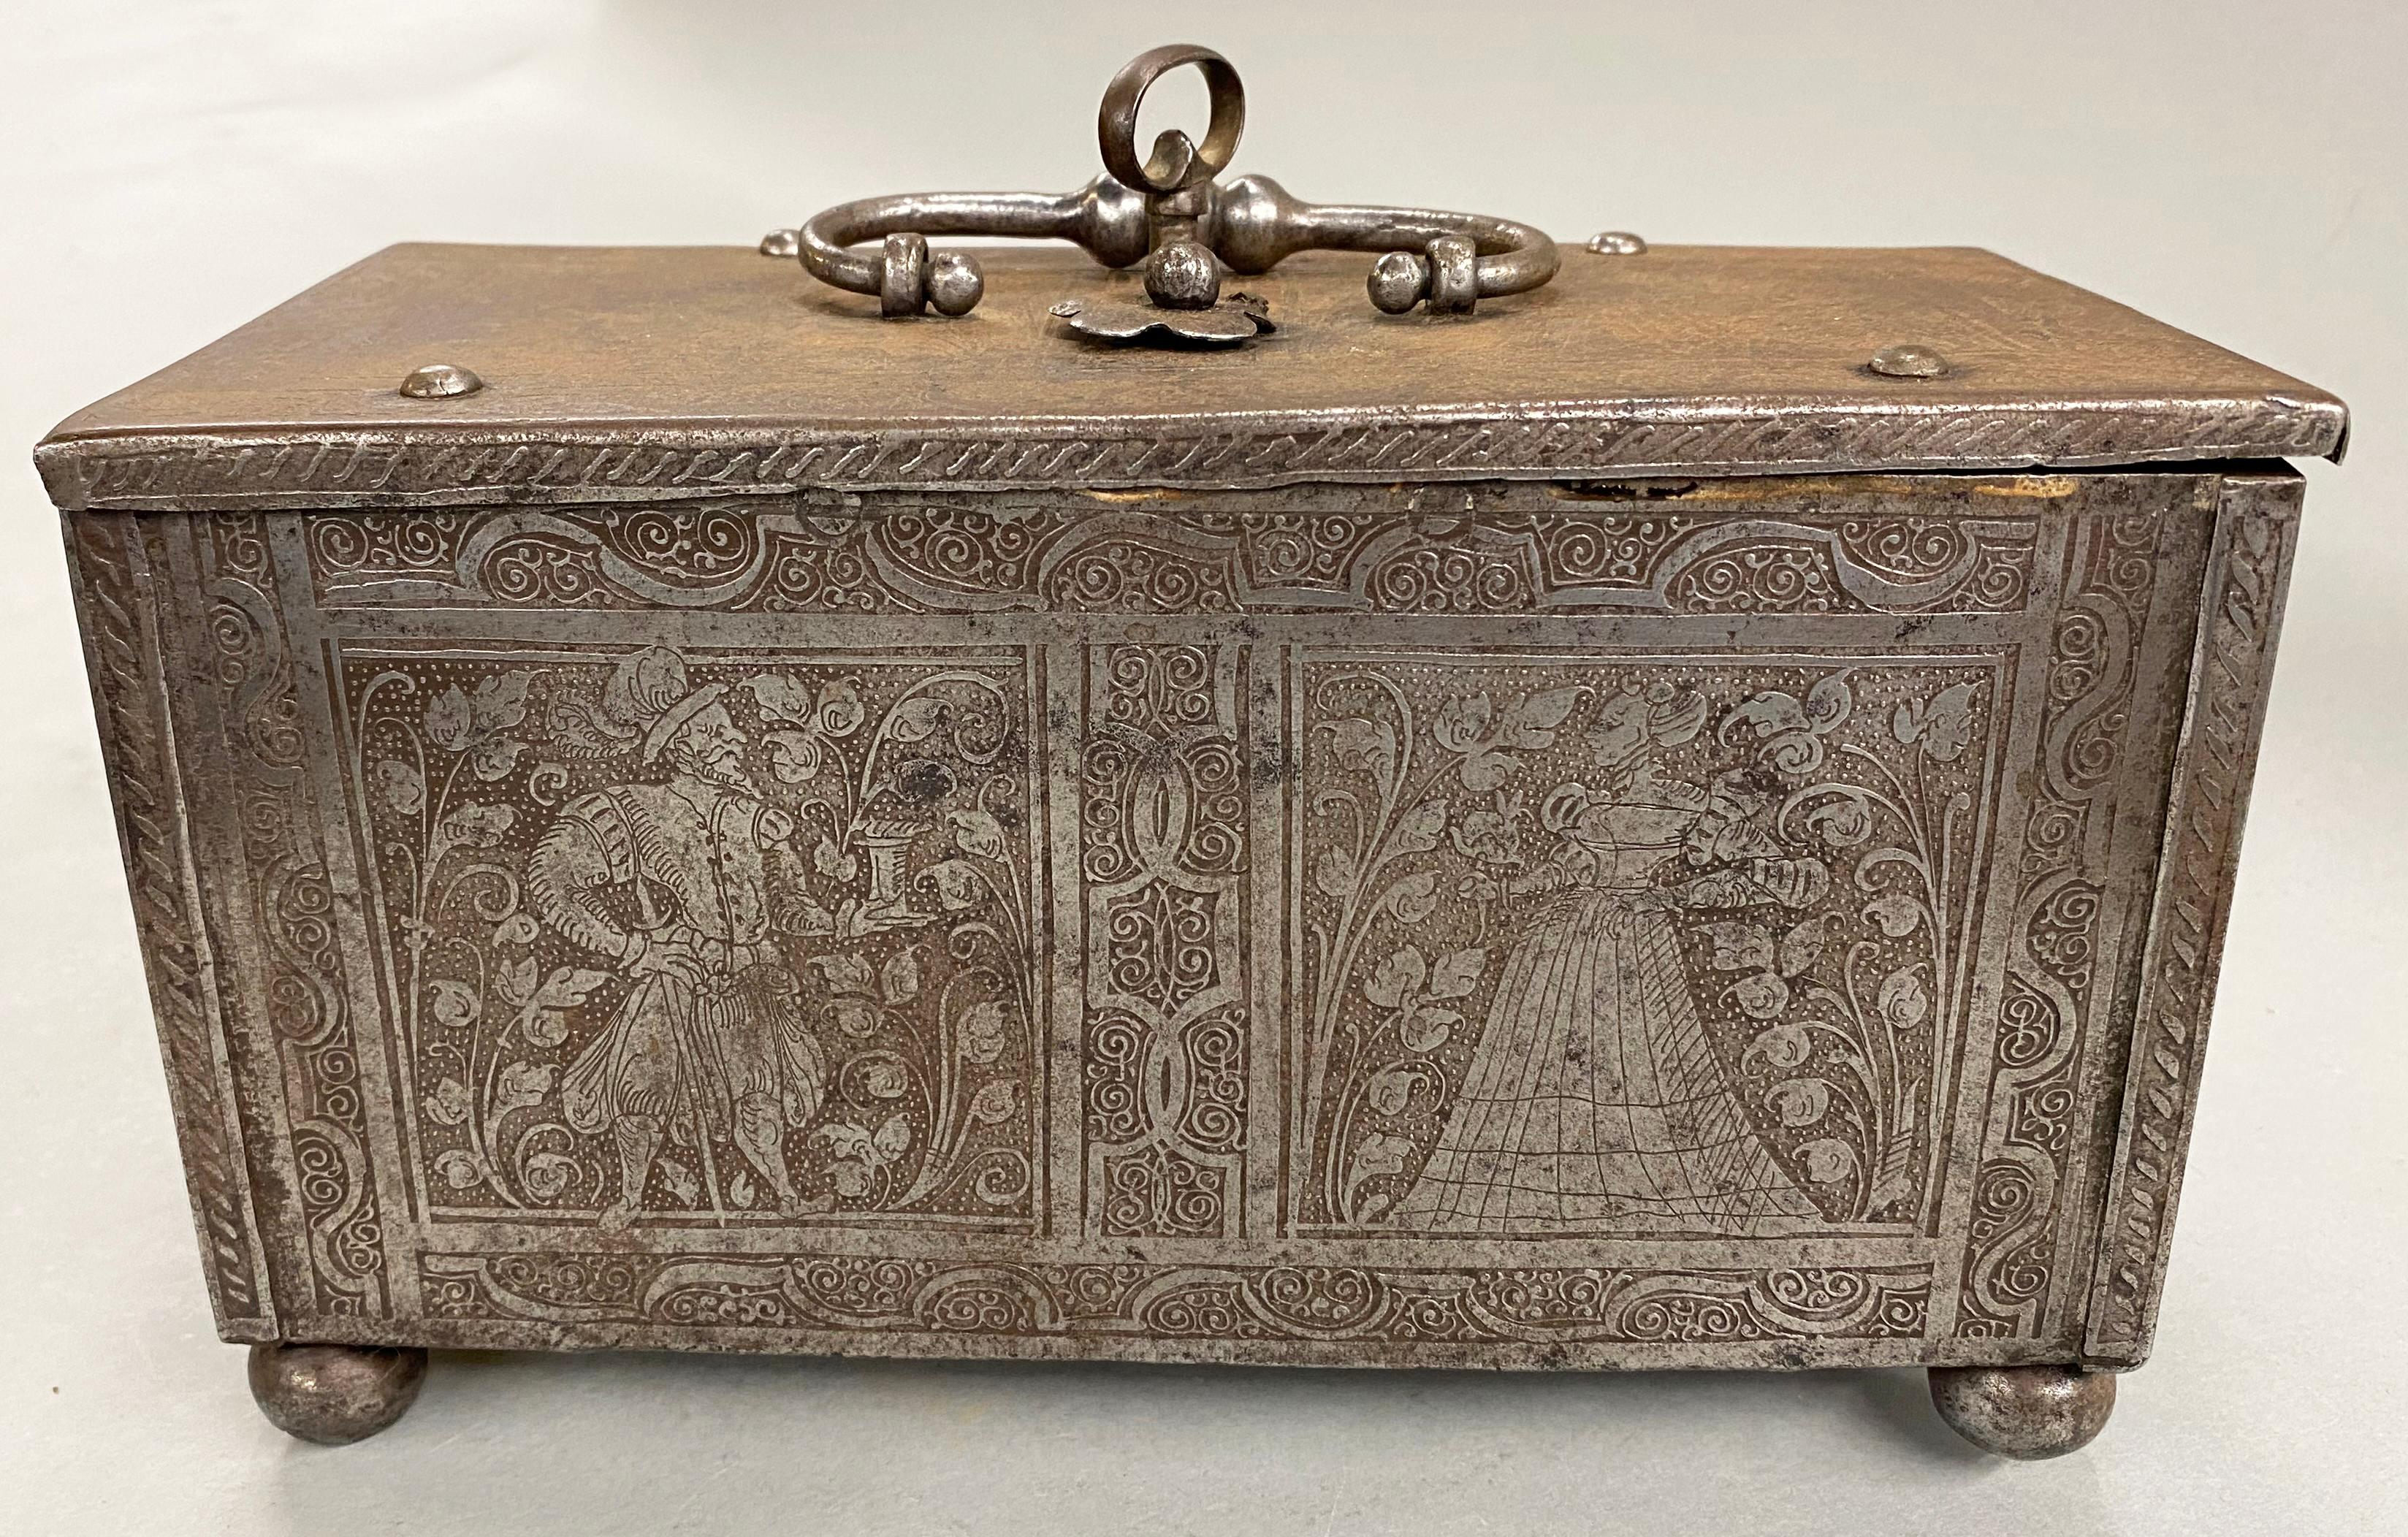 A fine example of a money chest or cash box with steel engraved figures on each side and an intricate locking mechanism under the lid, typical of metalwork coming out of a host of cities in southern Germany, Austria and Switzerland, renowned for